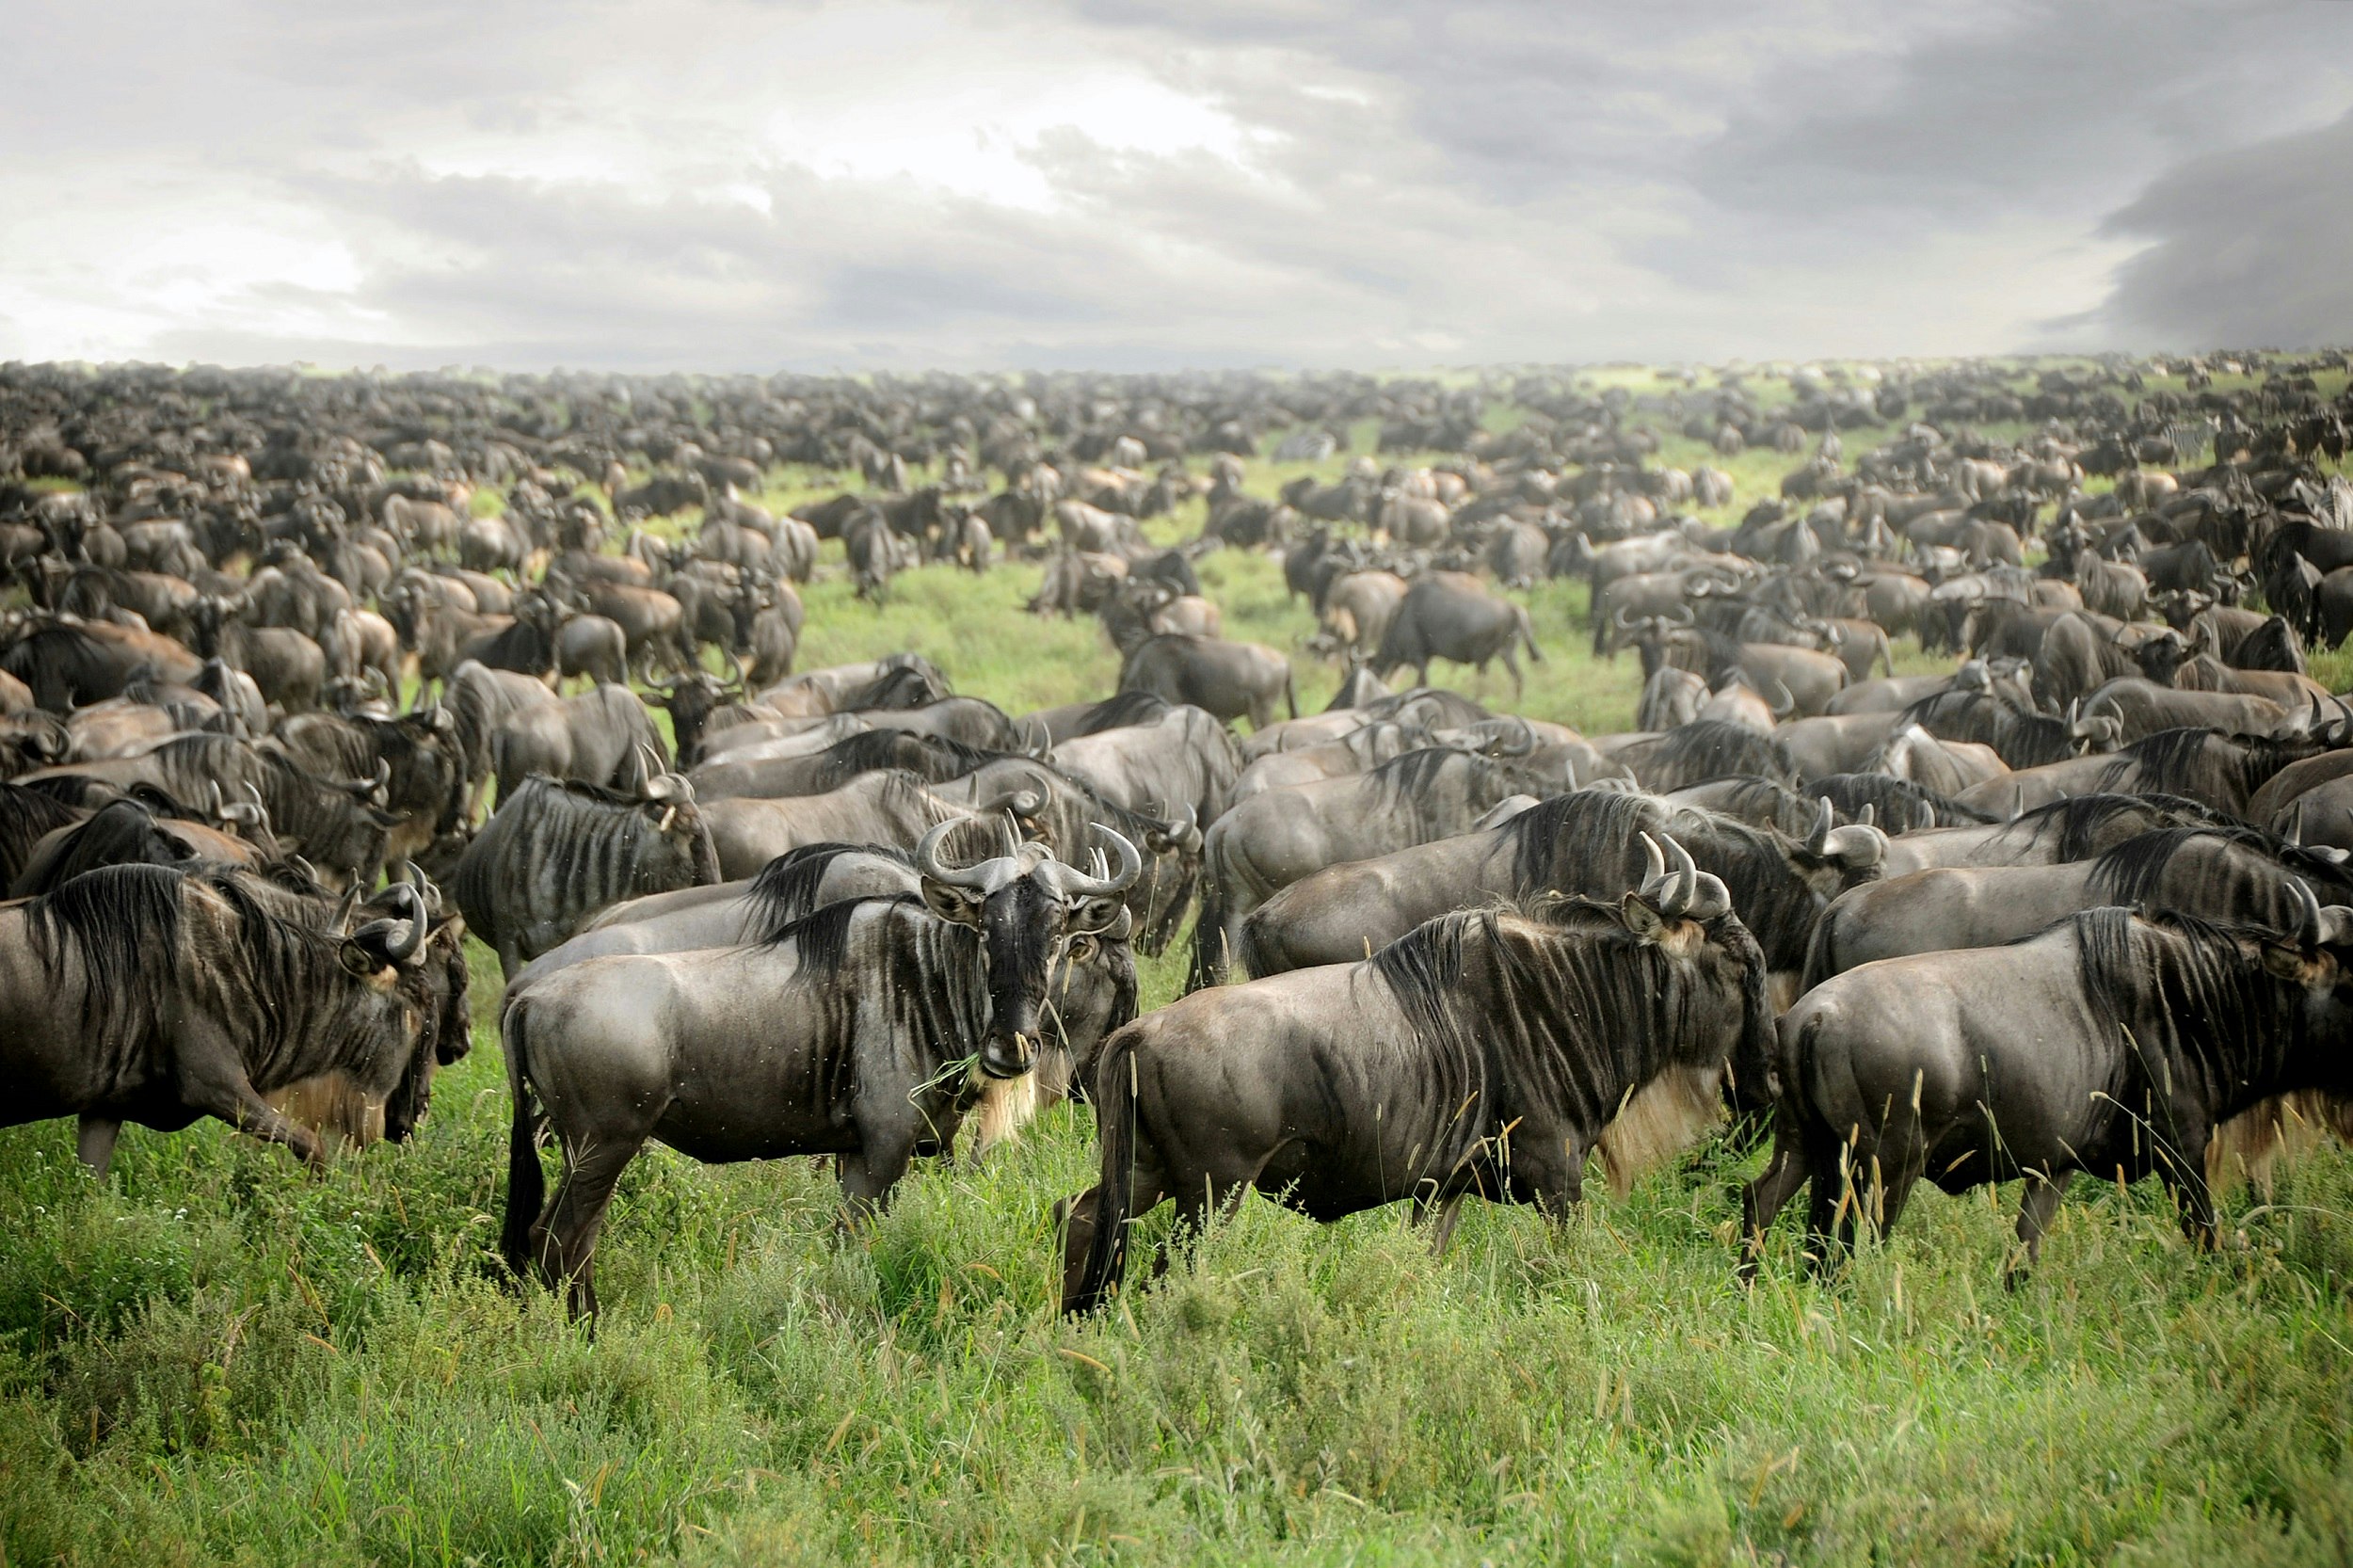 Tens of thousands of wildebeest stand in the long green grasses of the Serengeti; they are so tightly packed that the grass is hard to see.